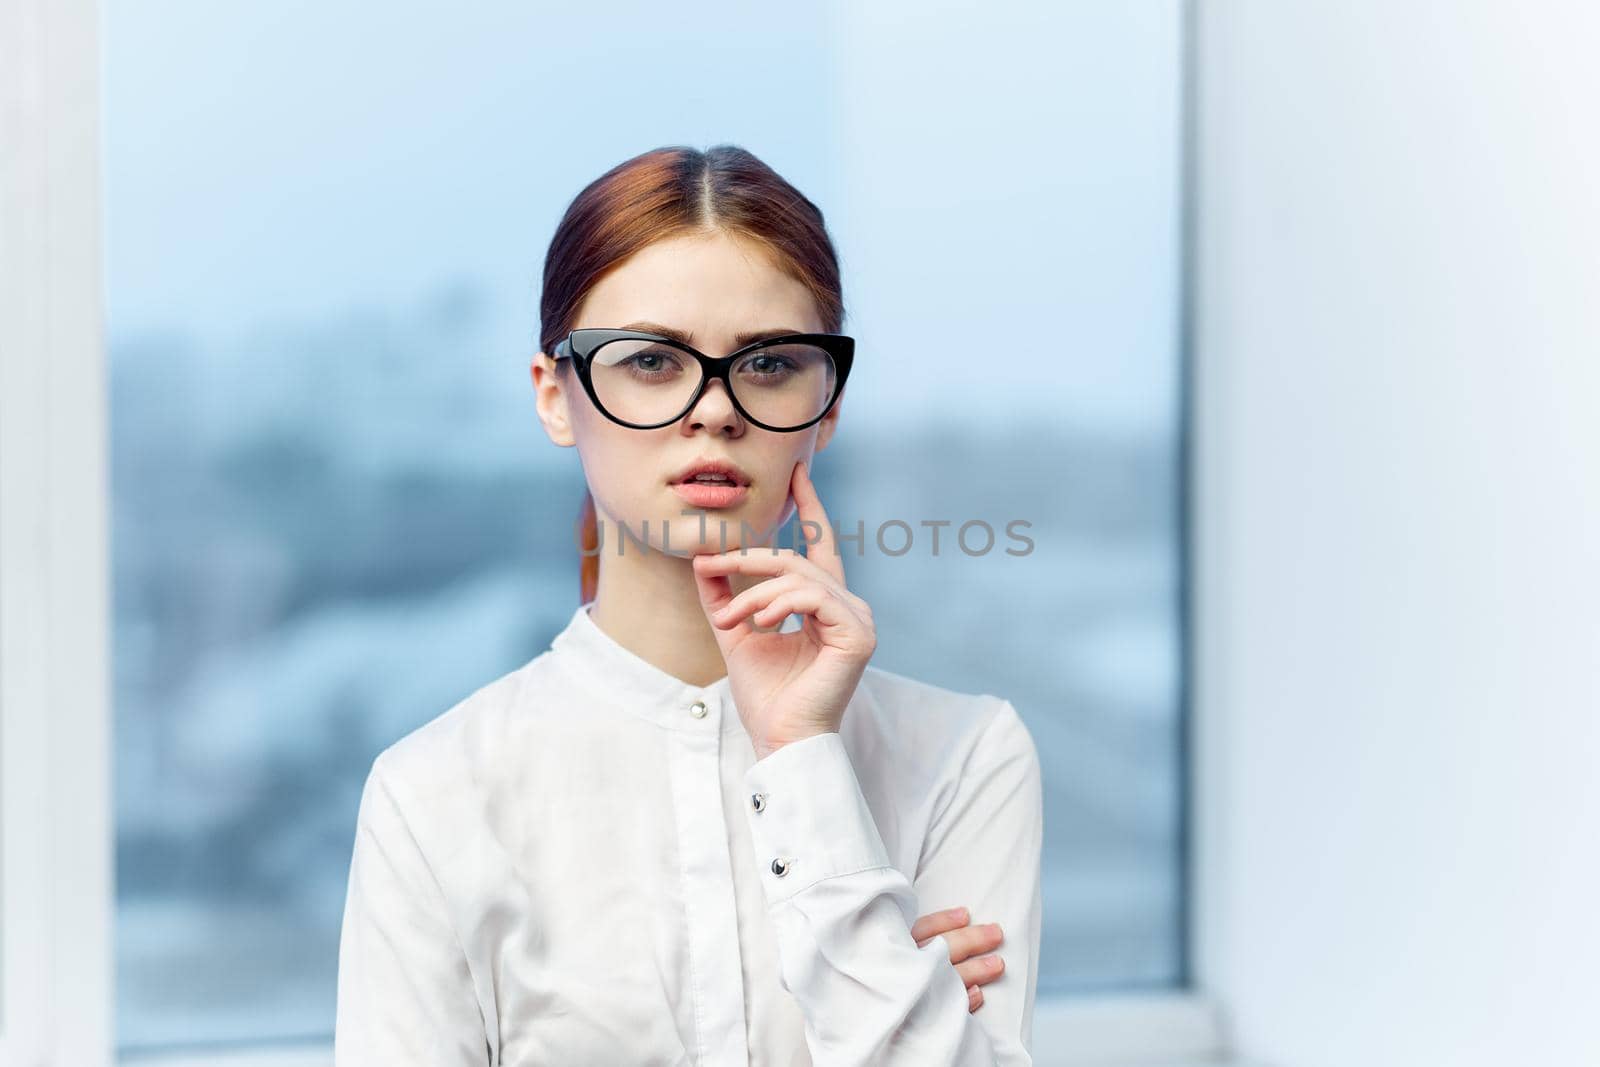 woman secretary in white shirt office work professional. High quality photo